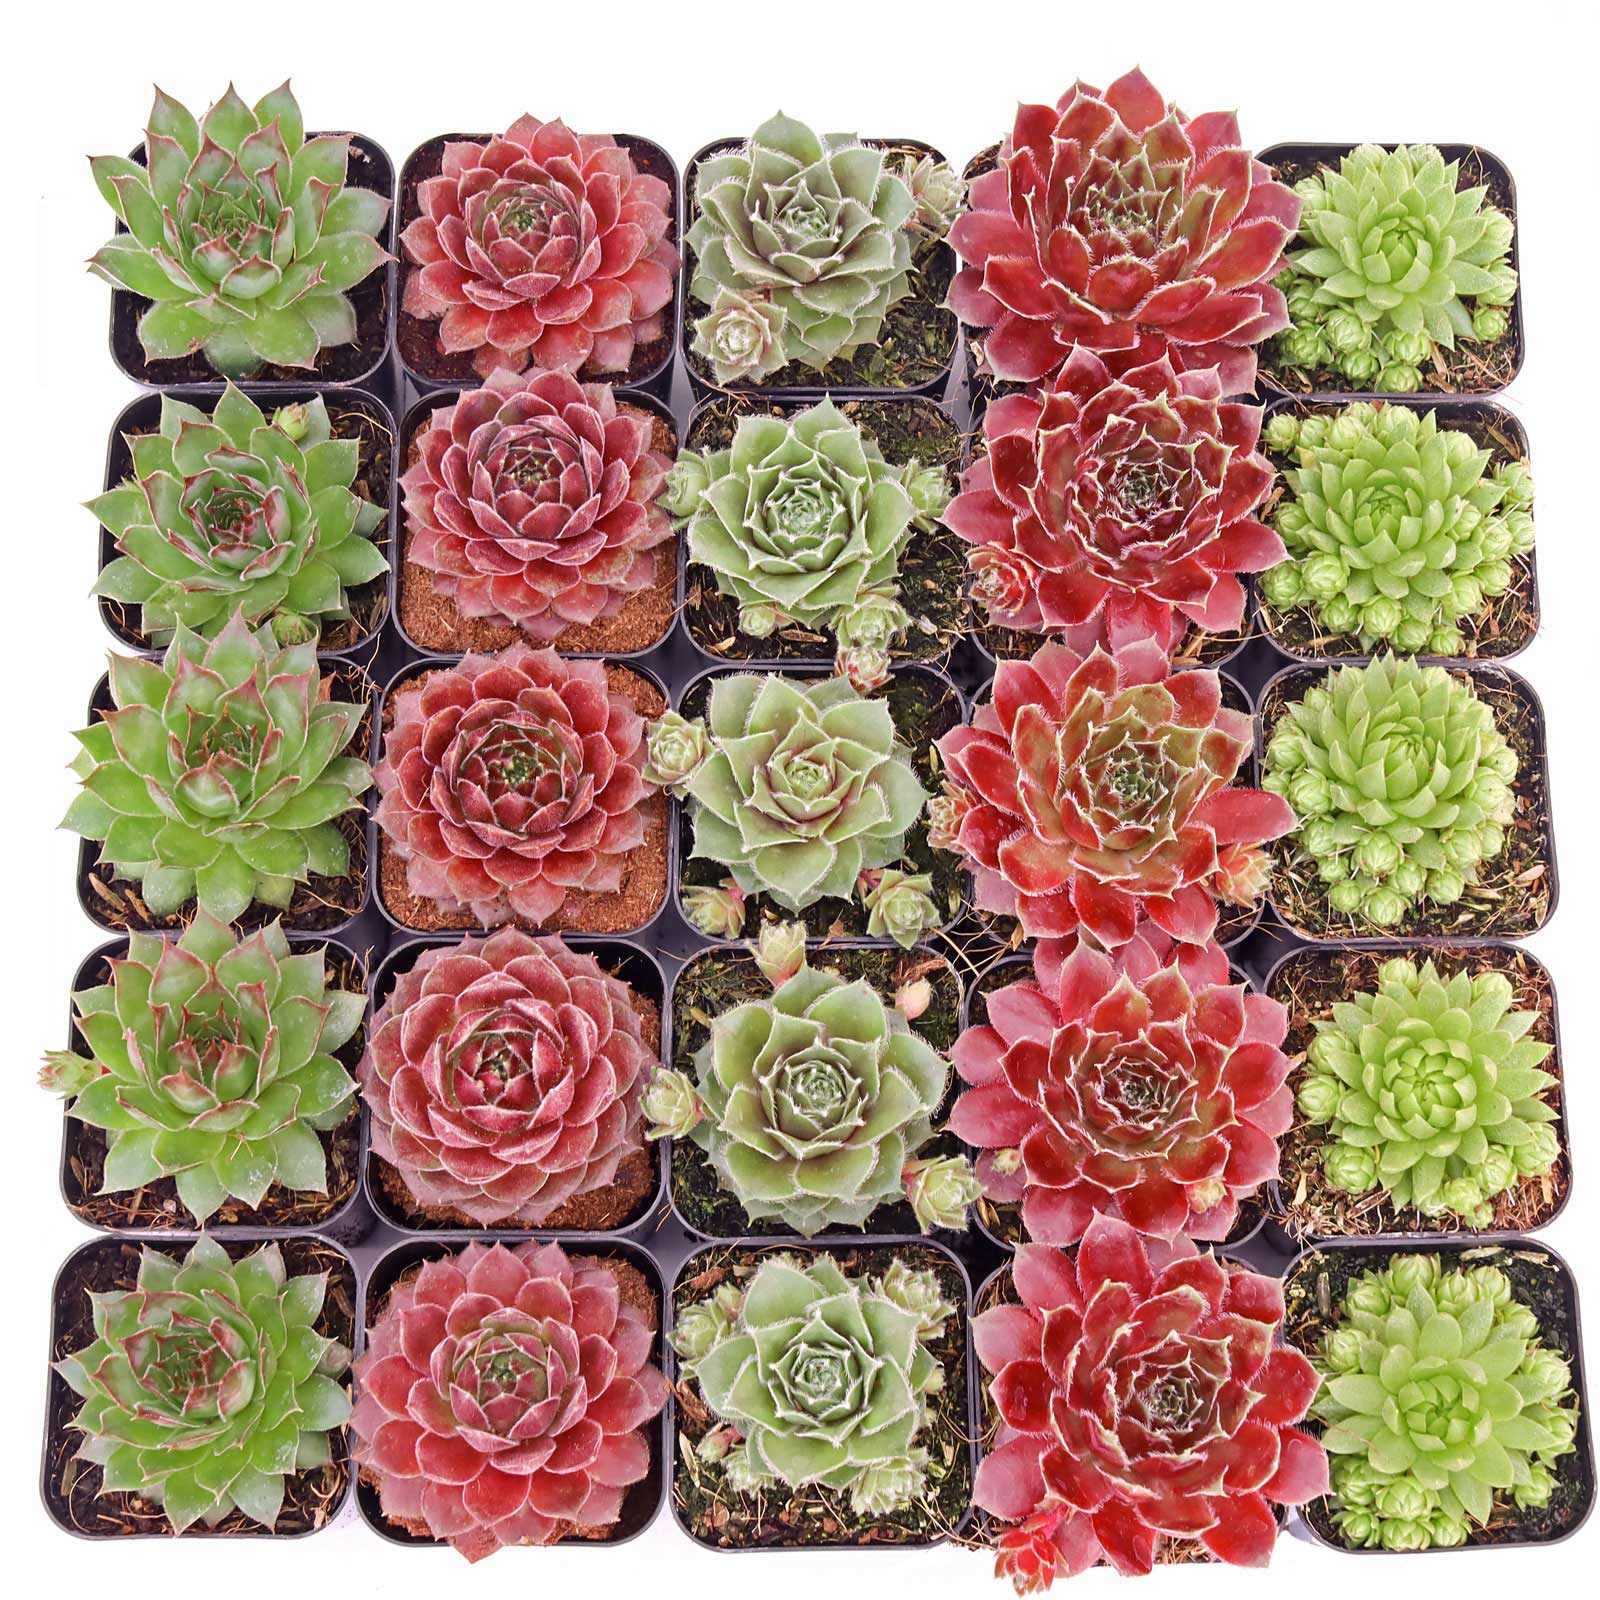 Sempervivum (Hens & Chicks) Bulk 25 Tray - 5 Types w/ ID - 2in Pots Questions & Answers